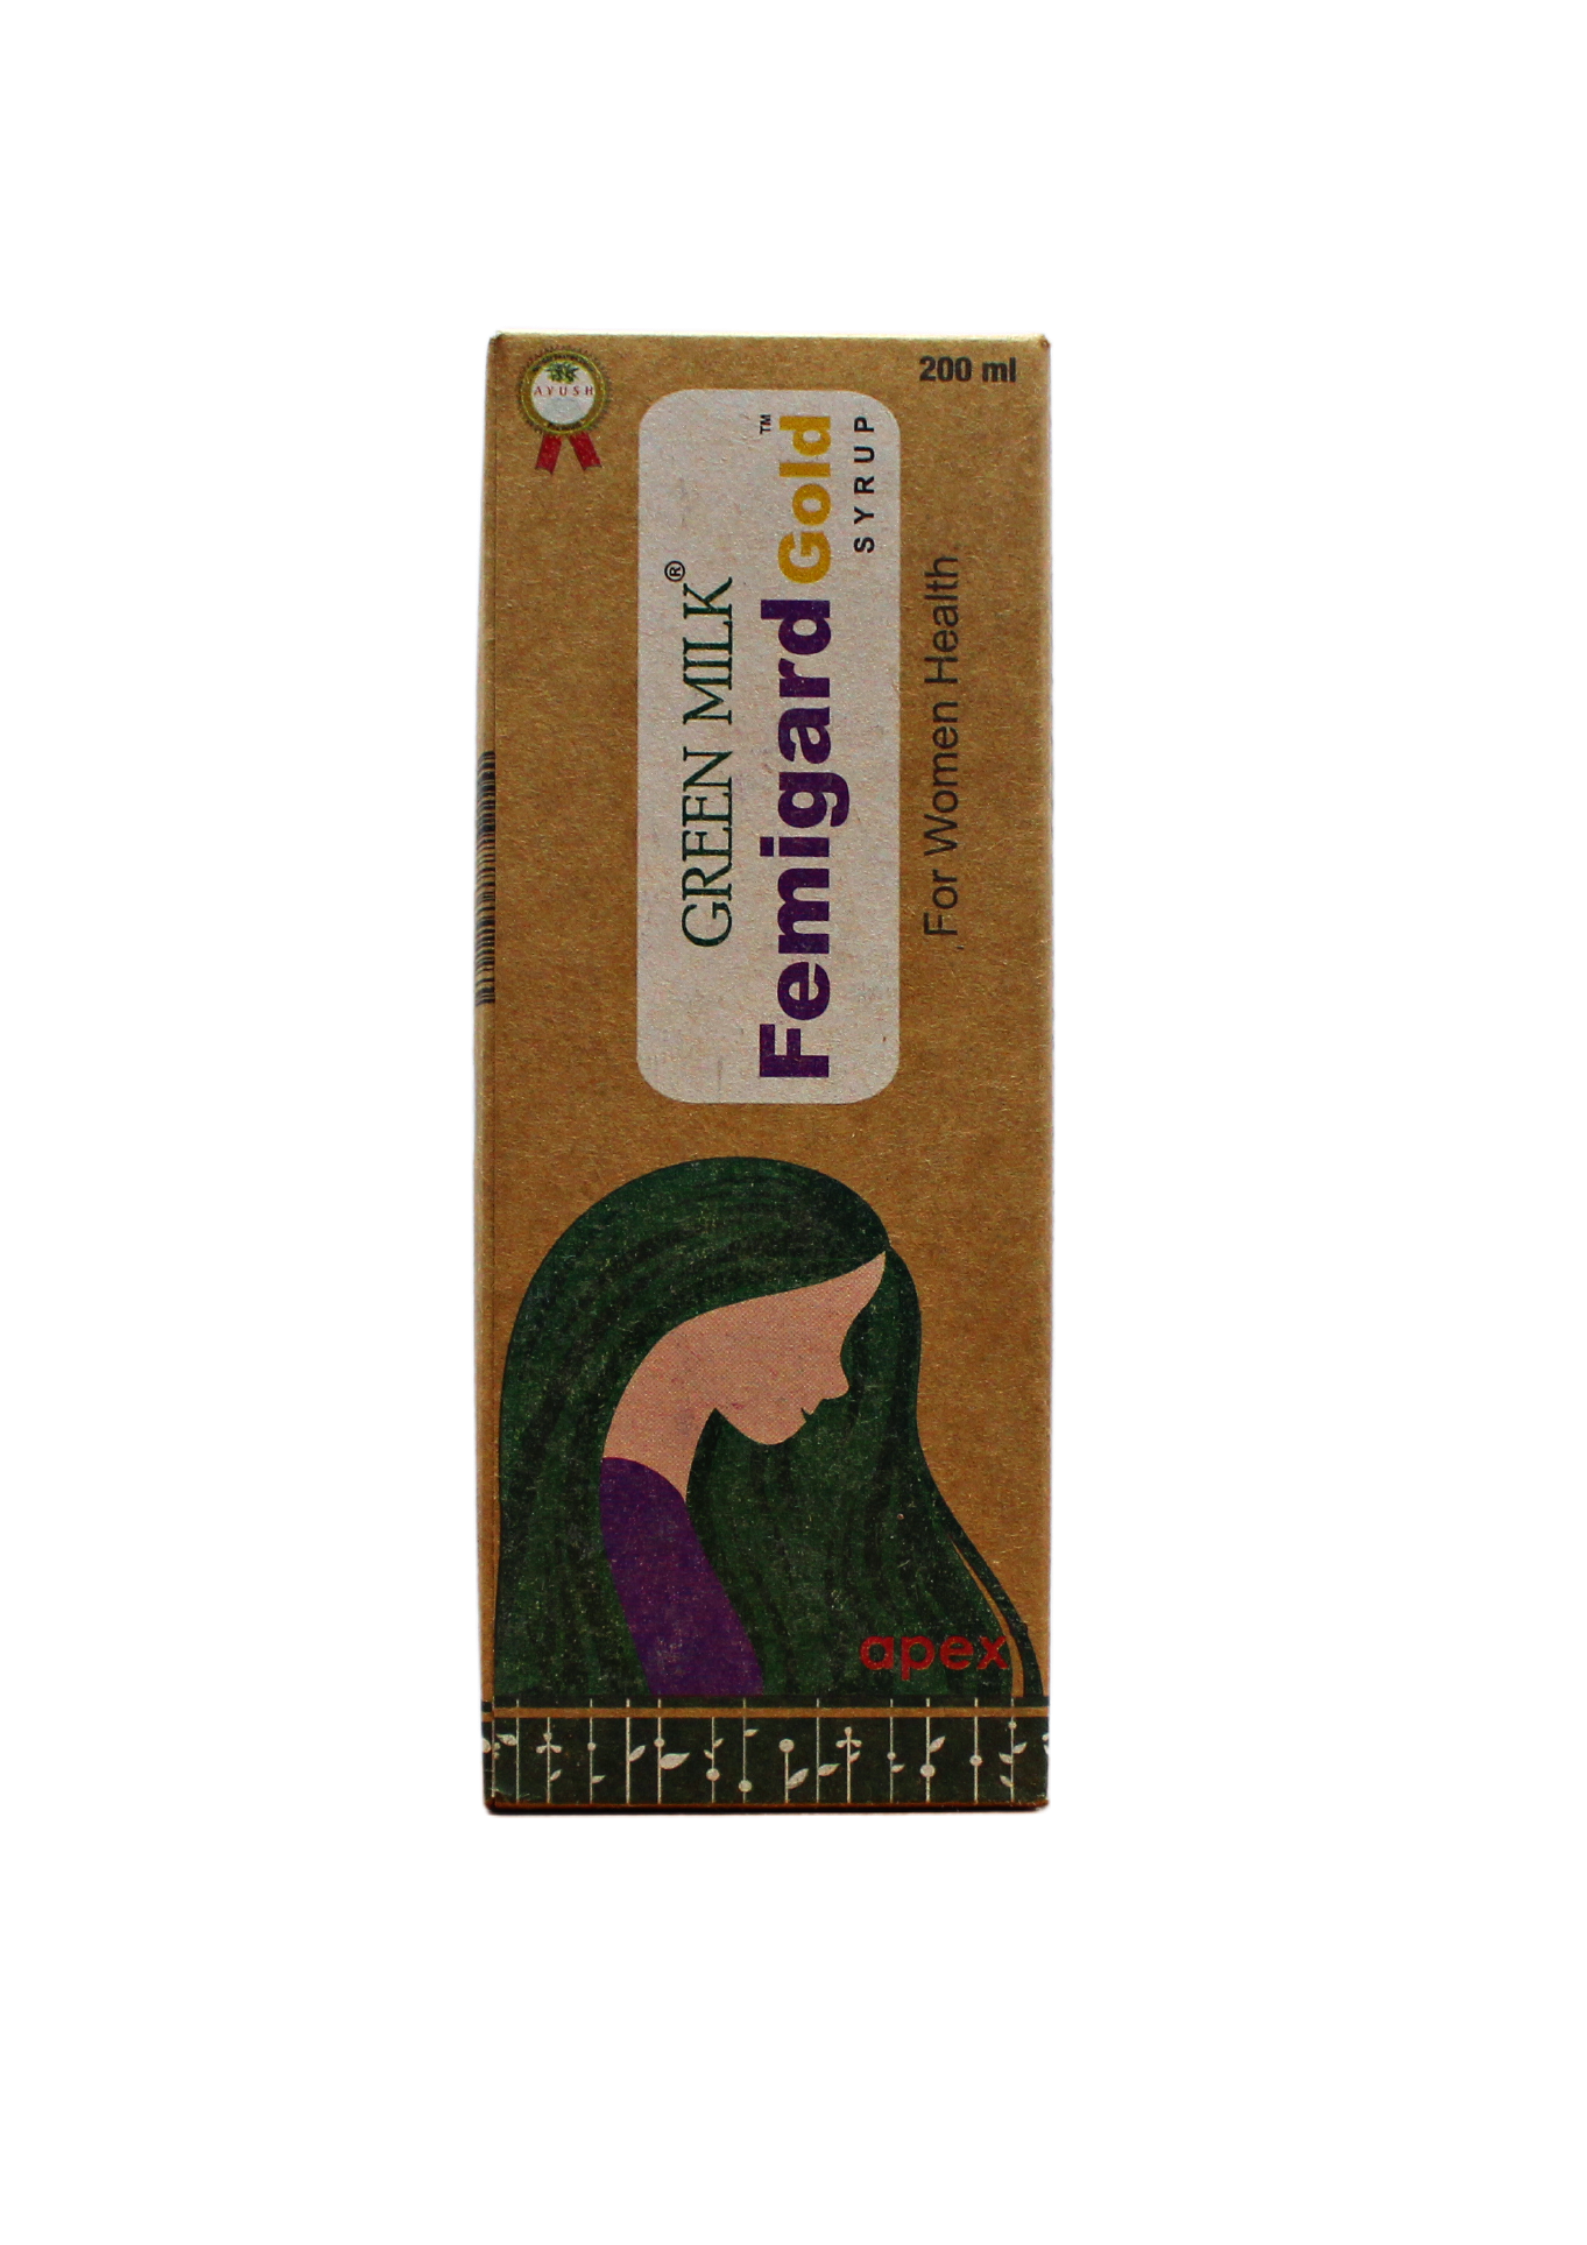 Shop Femigard Gold Syrup 200ml at price 108.00 from Apex Ayurveda Online - Ayush Care